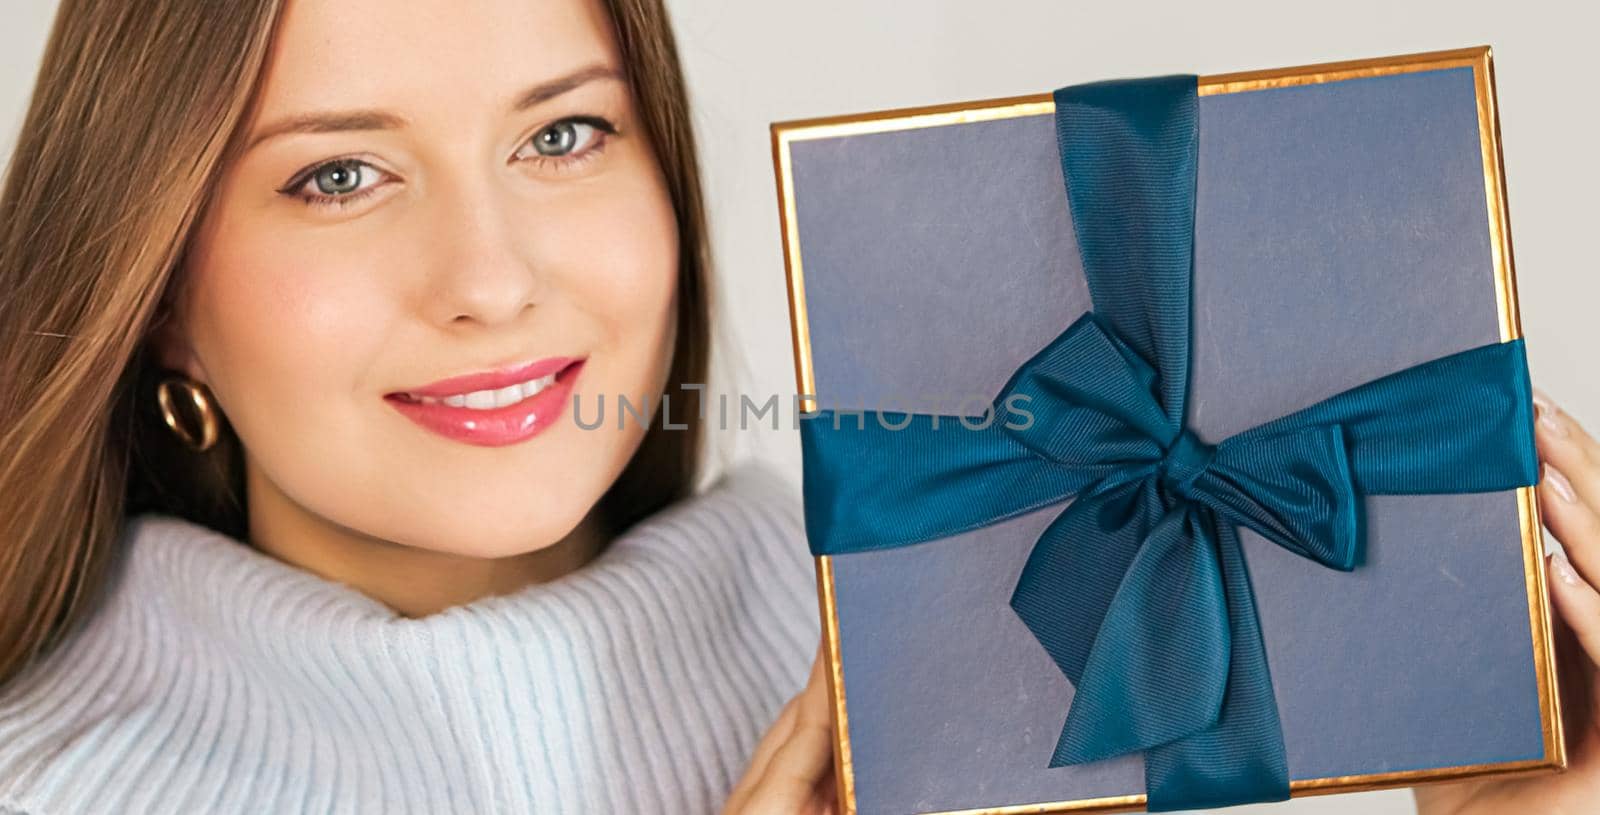 Winter holidays, present and Merry Christmas concept, happy woman smiling and holding wrapped gift box, close-up portrait